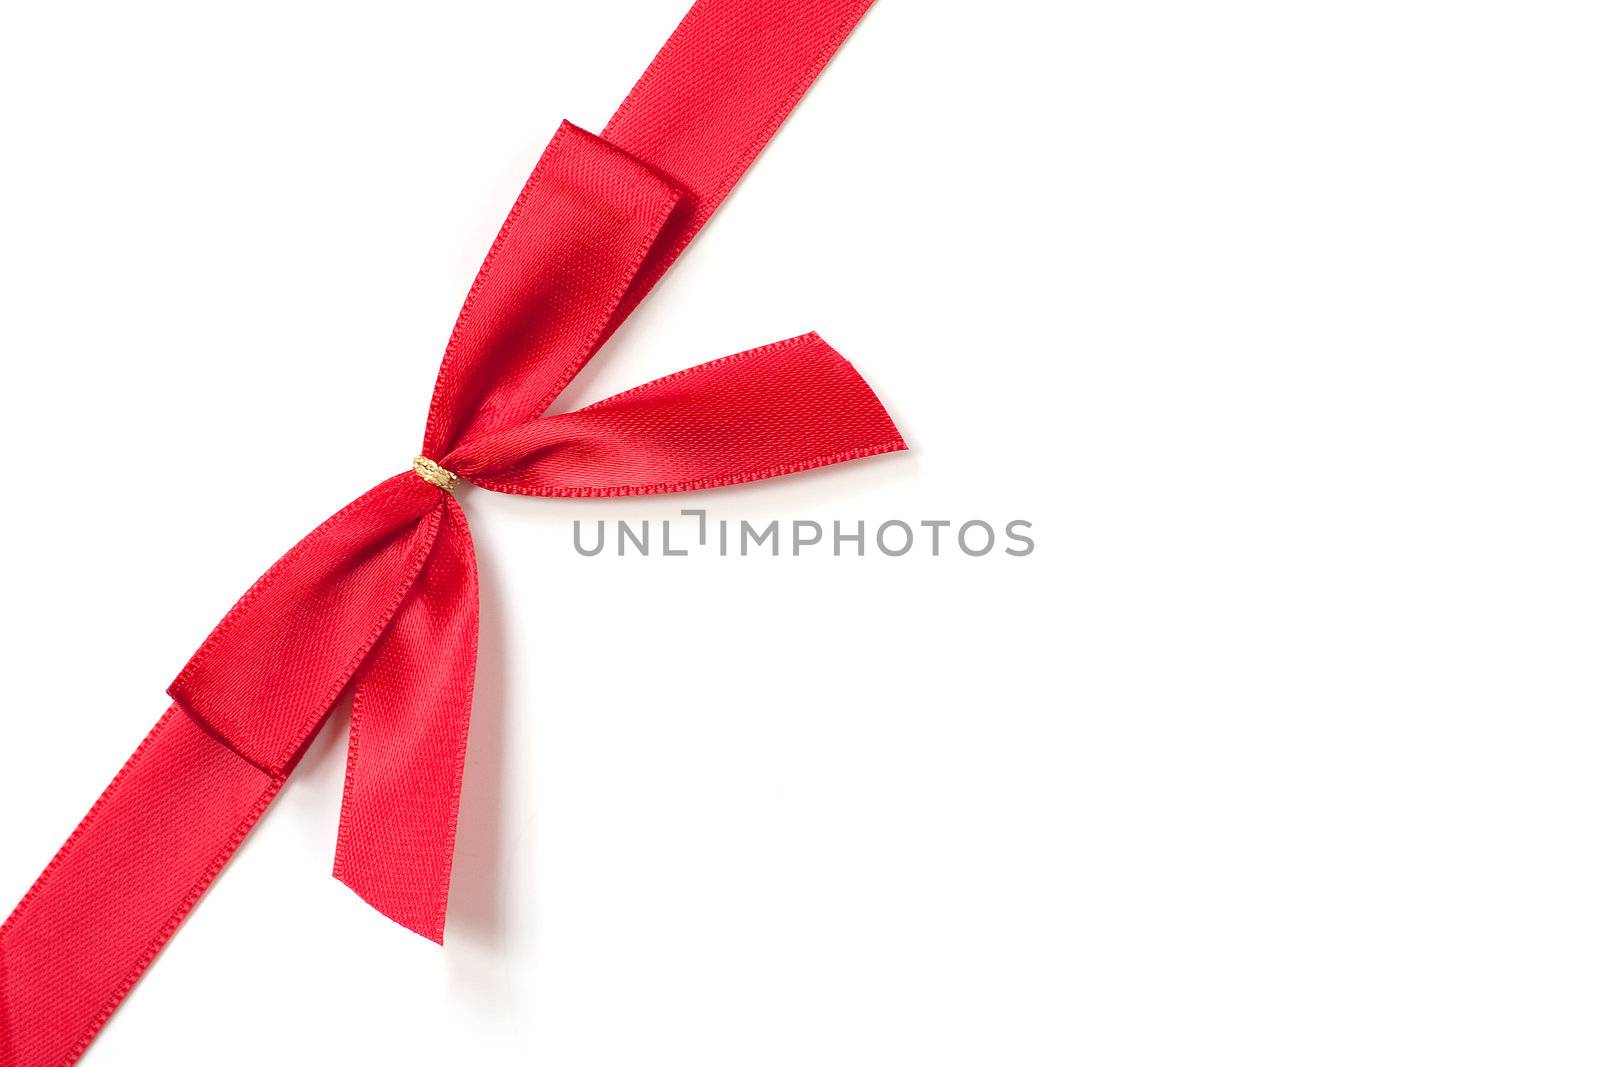 Red sild ribbon, tied in a bow on a white background.